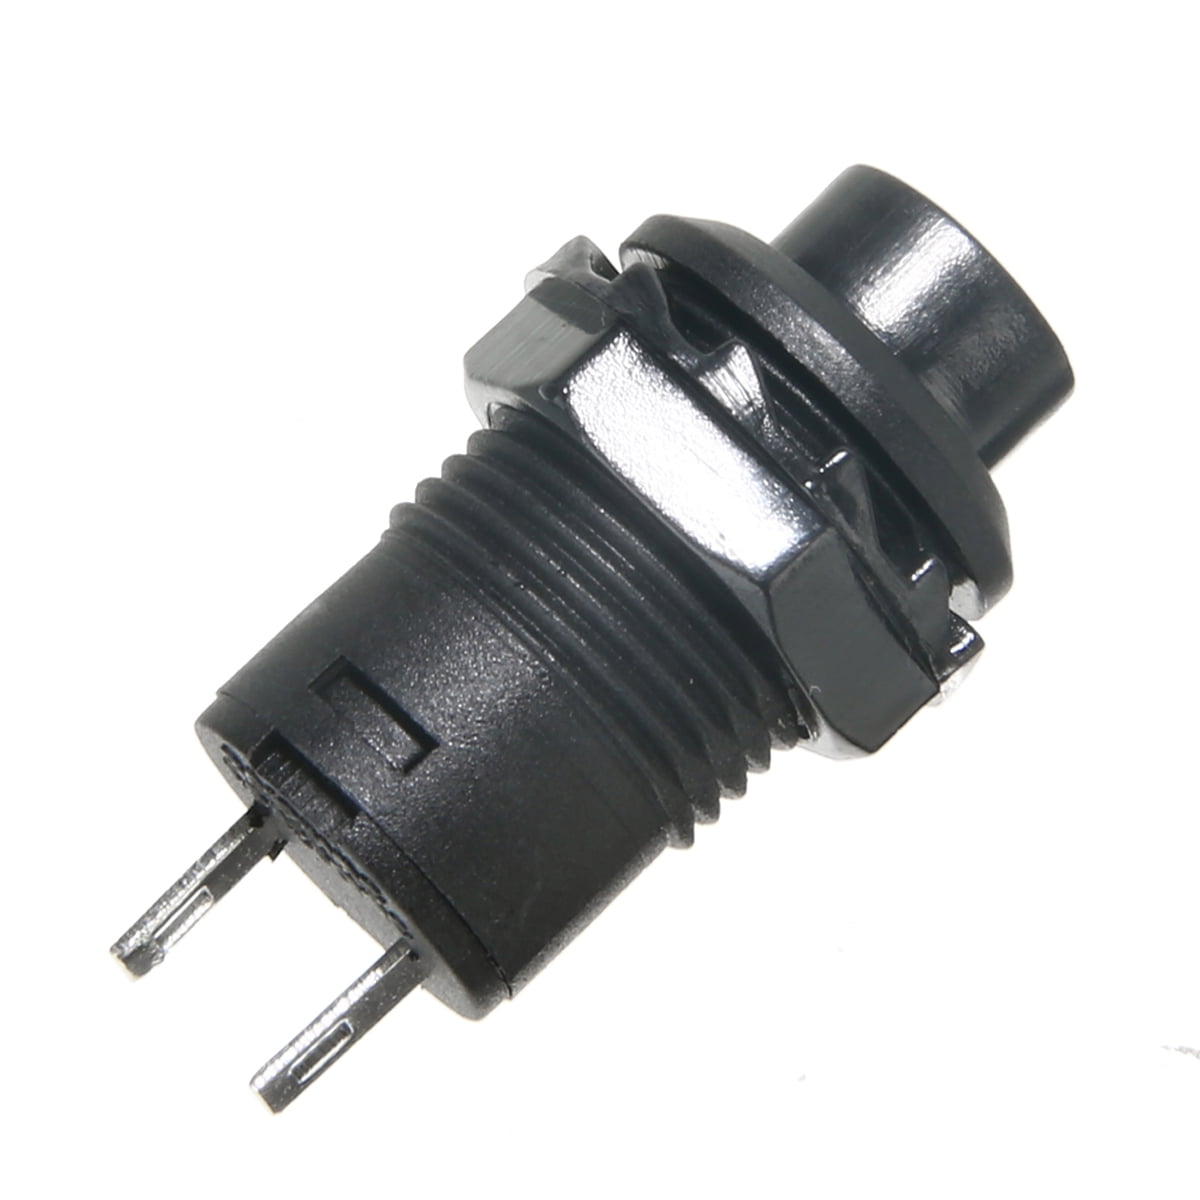 Momentary Push Button Switch Horn Doorbell Car Dash 12V On 5 x Black Off 